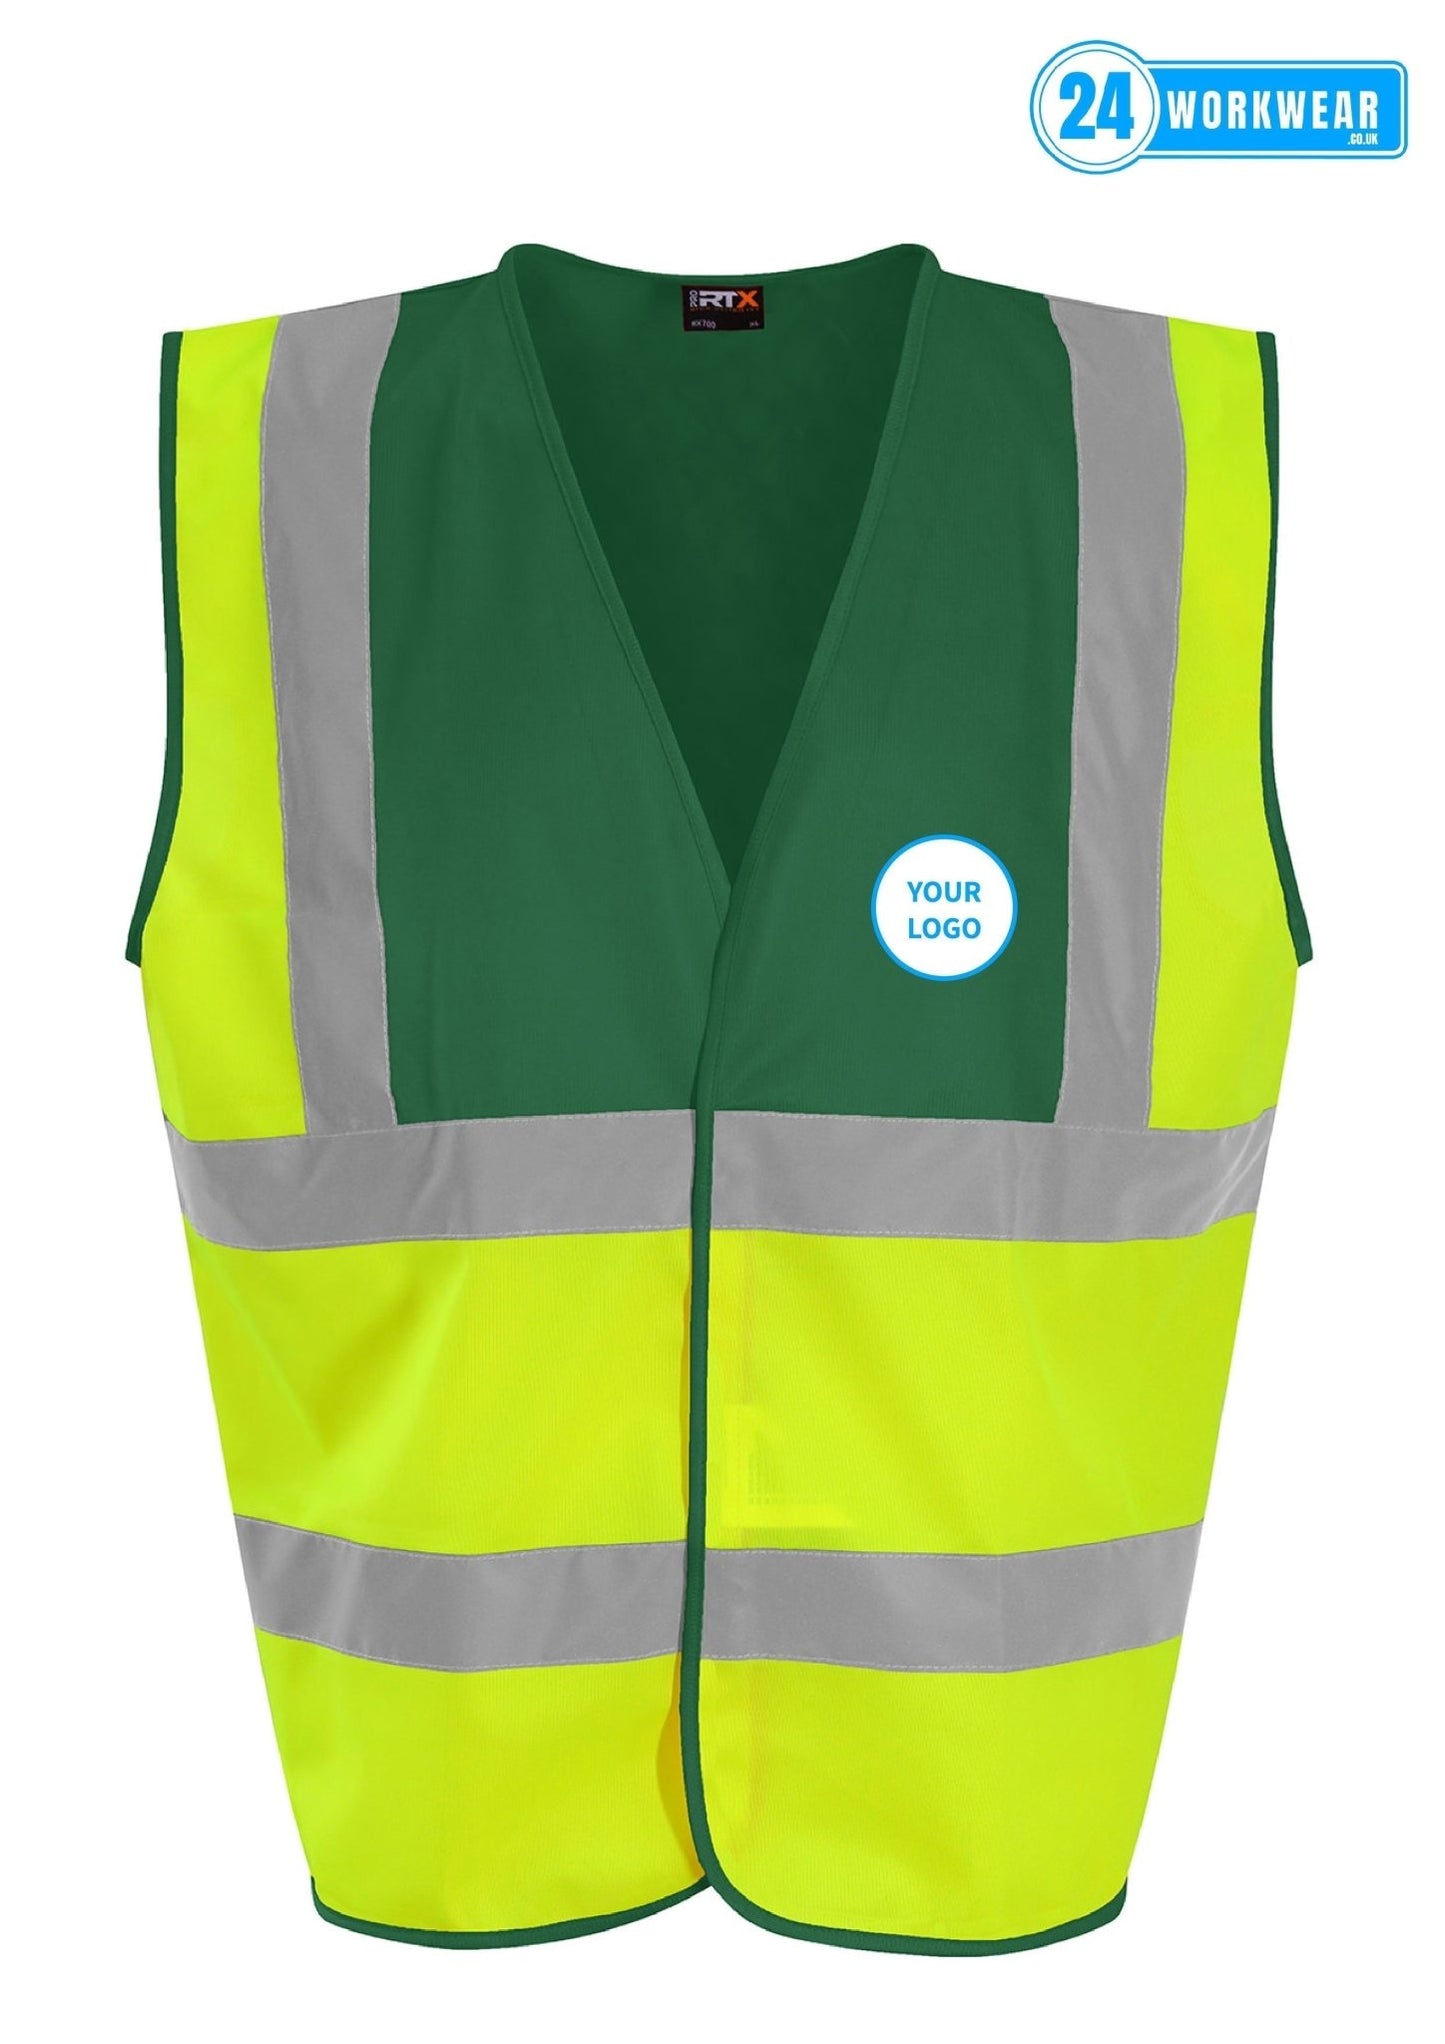 20 x High Visibility Waistcoat Deal - 24 Workwear - High Visibility